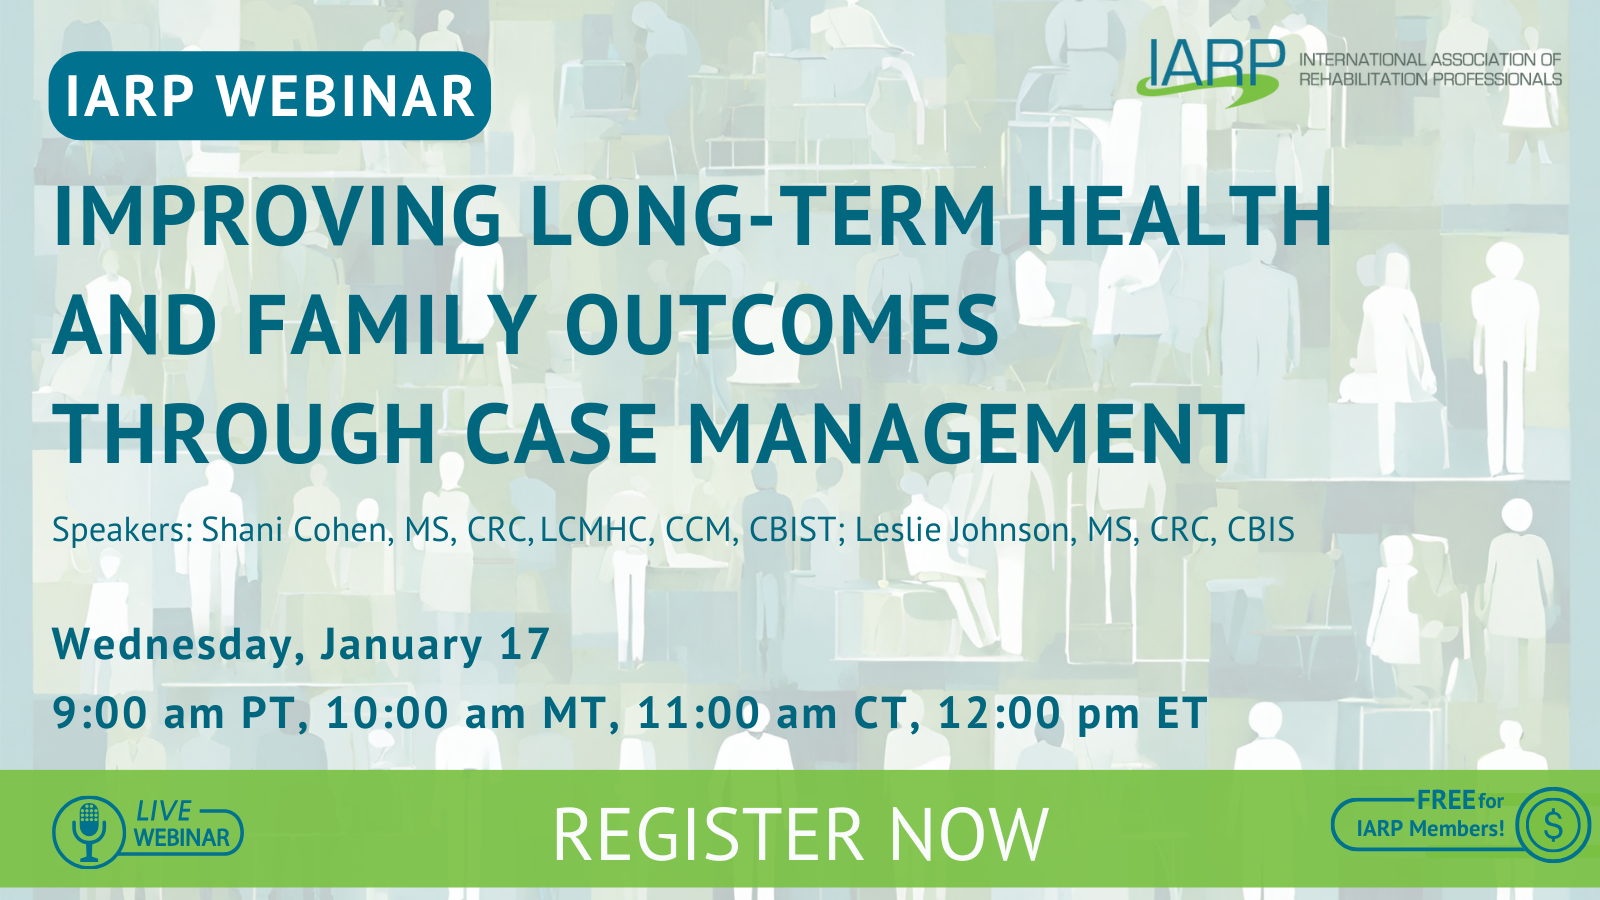 Upcoming Webinar: Improving Long-Term Health and Family Outcomes through Case Management